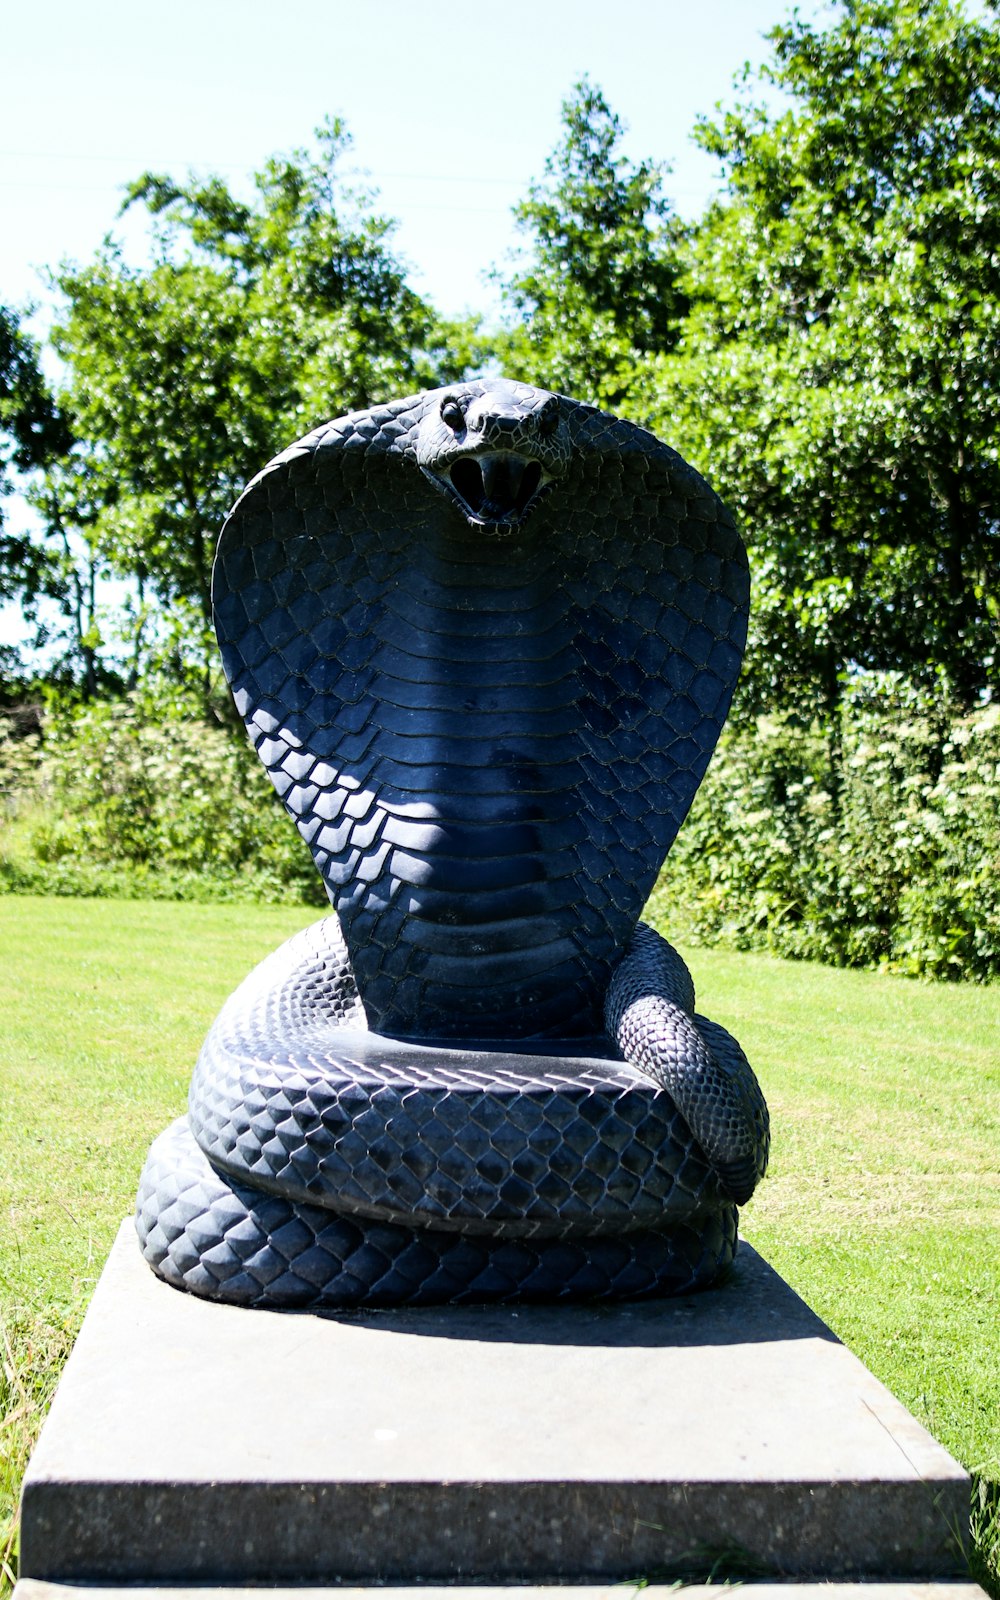 black and gray snake statue on green grass field during daytime